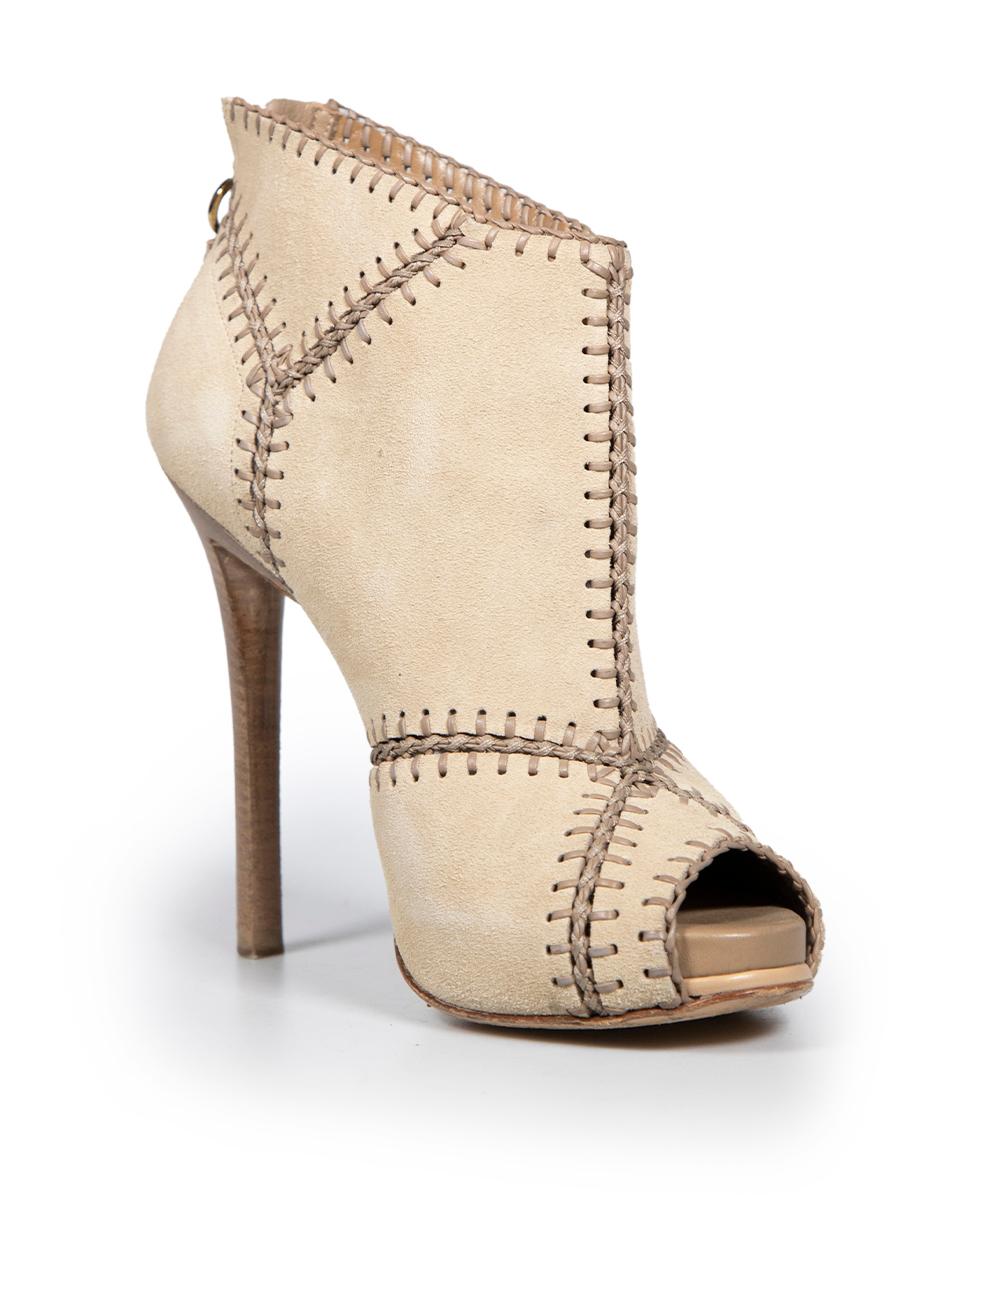 CONDITION is Very good. Minimal wear to shoes is evident. Minimal wear to the left-side of left shoe with dark mark on this used Roger Vivier designer resale item.
 
 Details
 Beige
 Suede
 Heels
 Peep toe
 High heeled
 Panelled detail
 Back zip